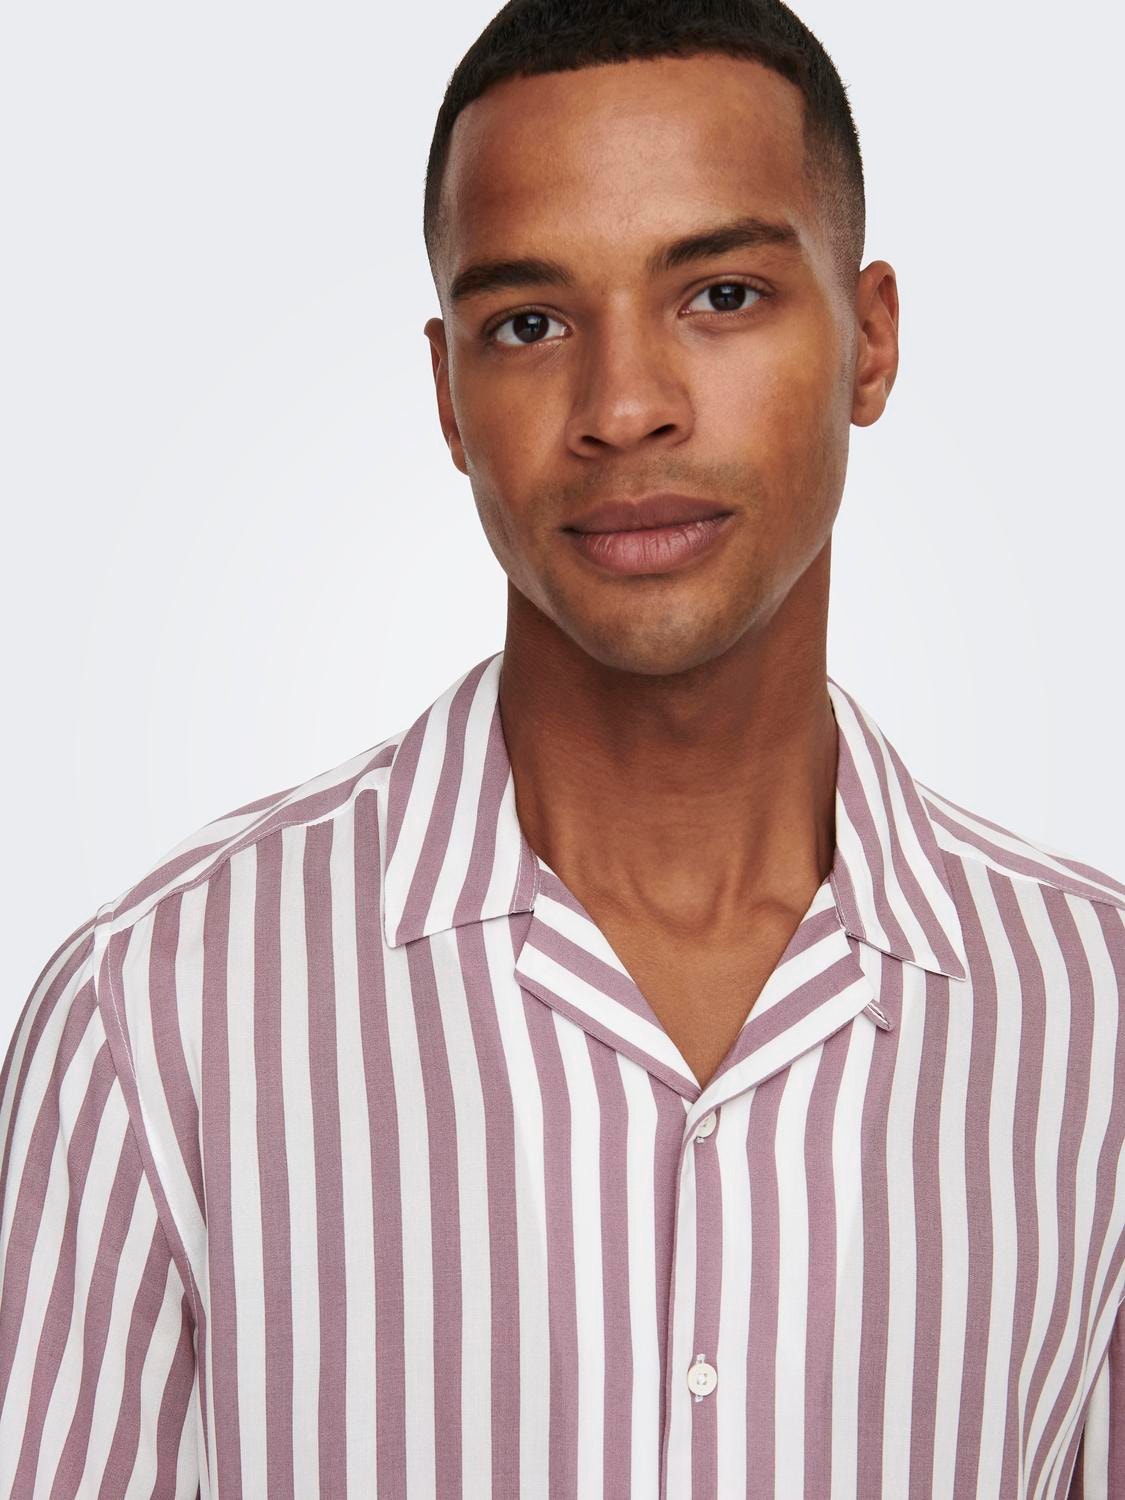 ONLY & SONS Short sleeved striped shirt -Nirvana - 22013267